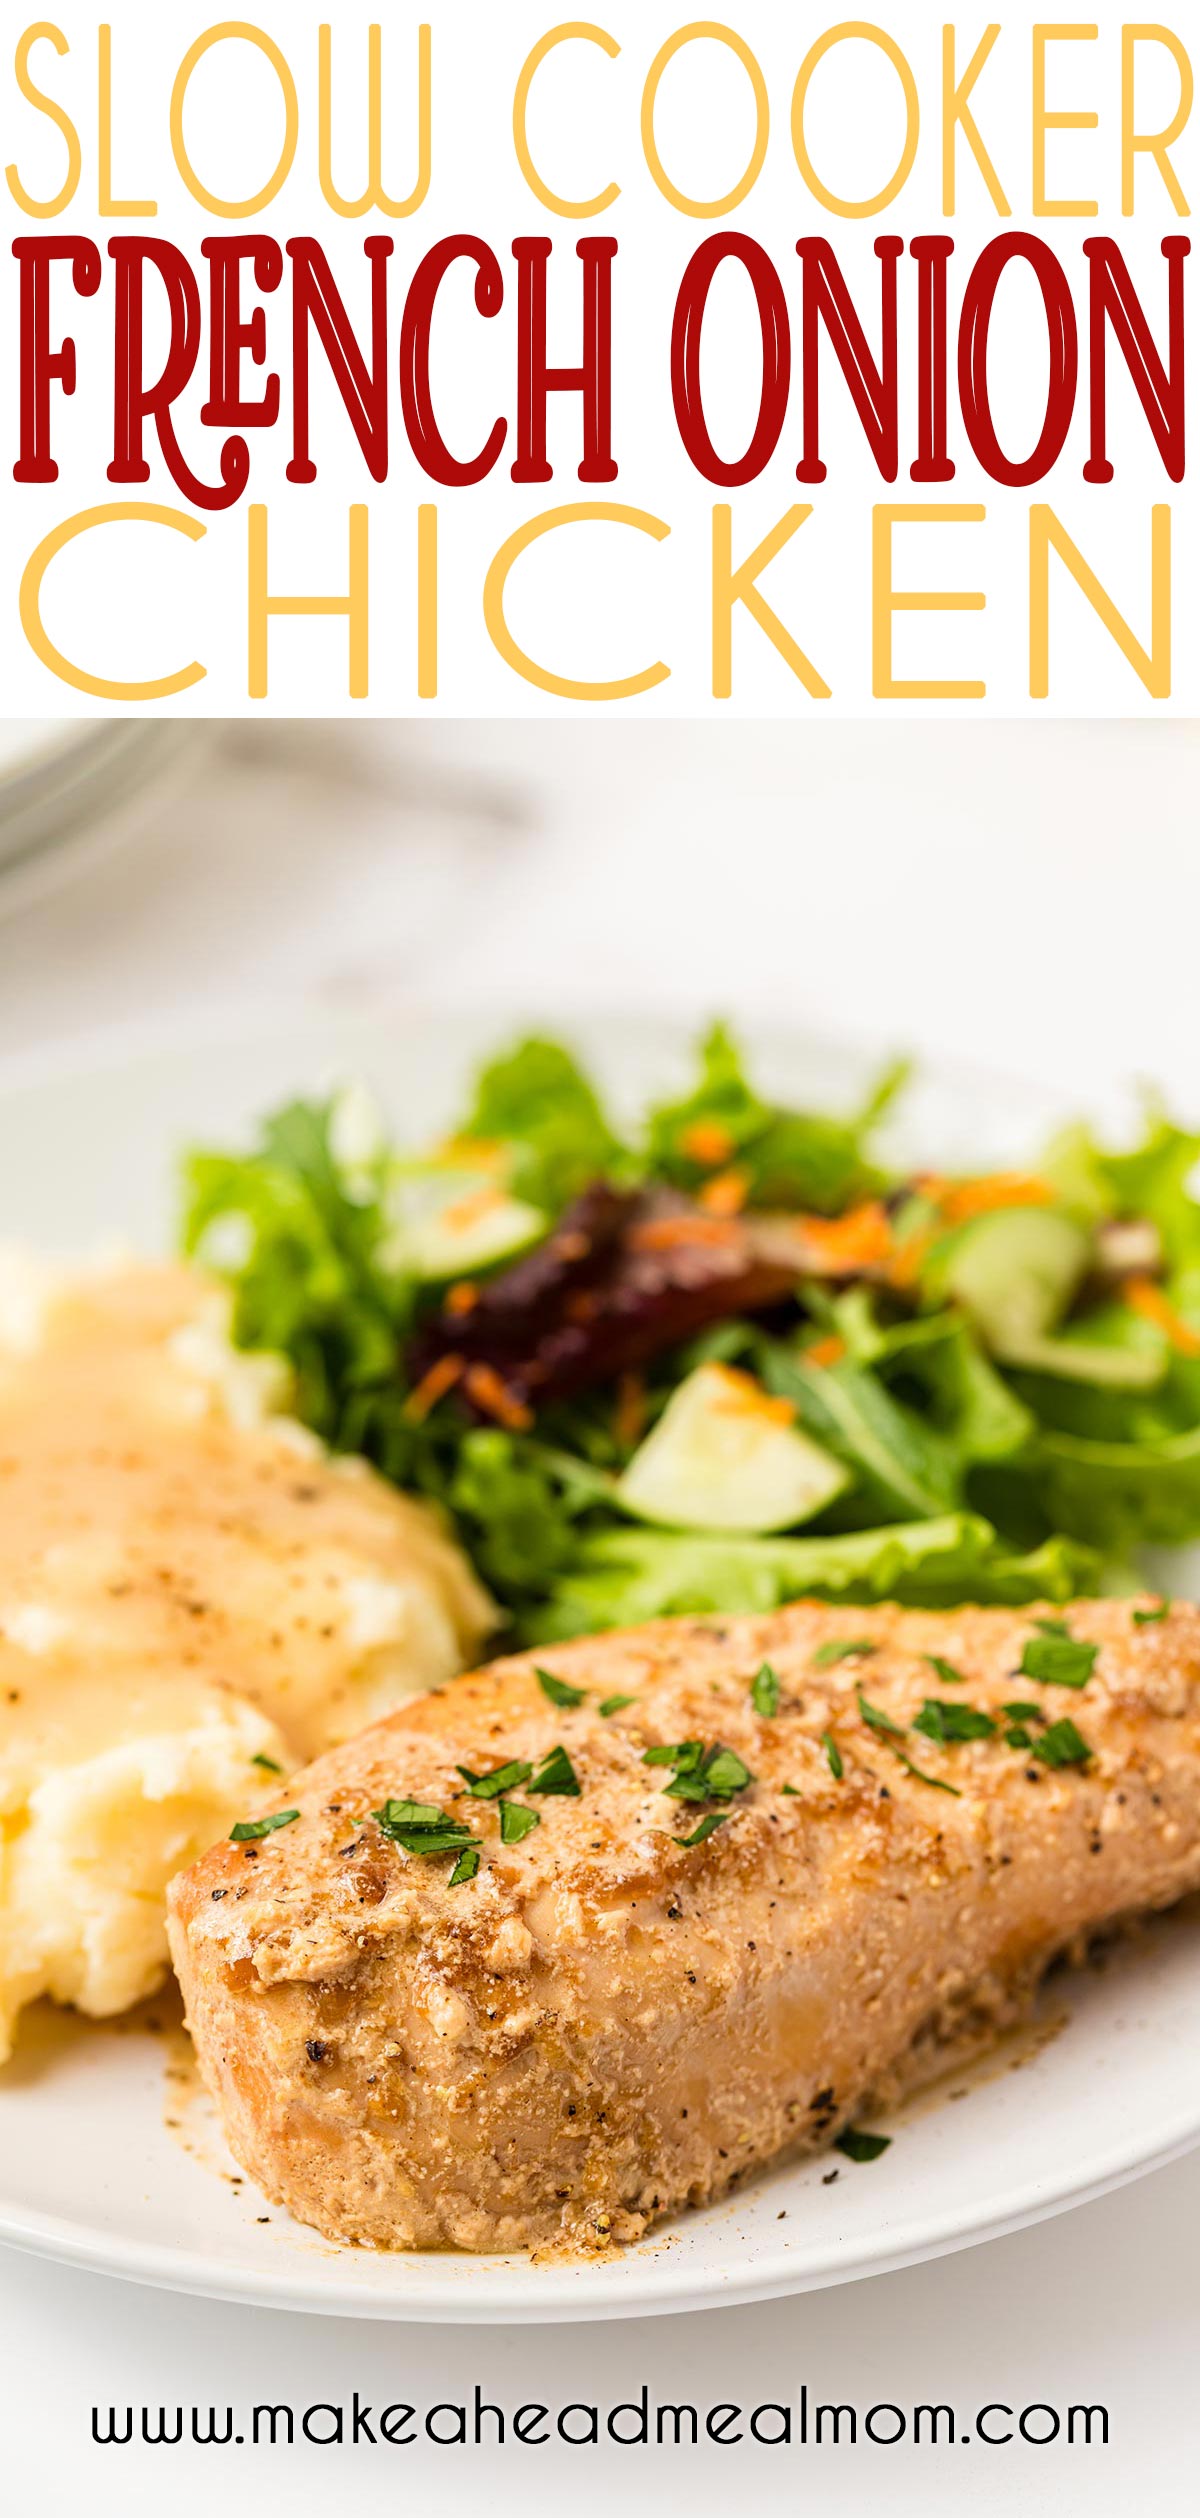 Slow Cooker French Onion Chicken (Freezer Meal) - Make-Ahead Meal Mom